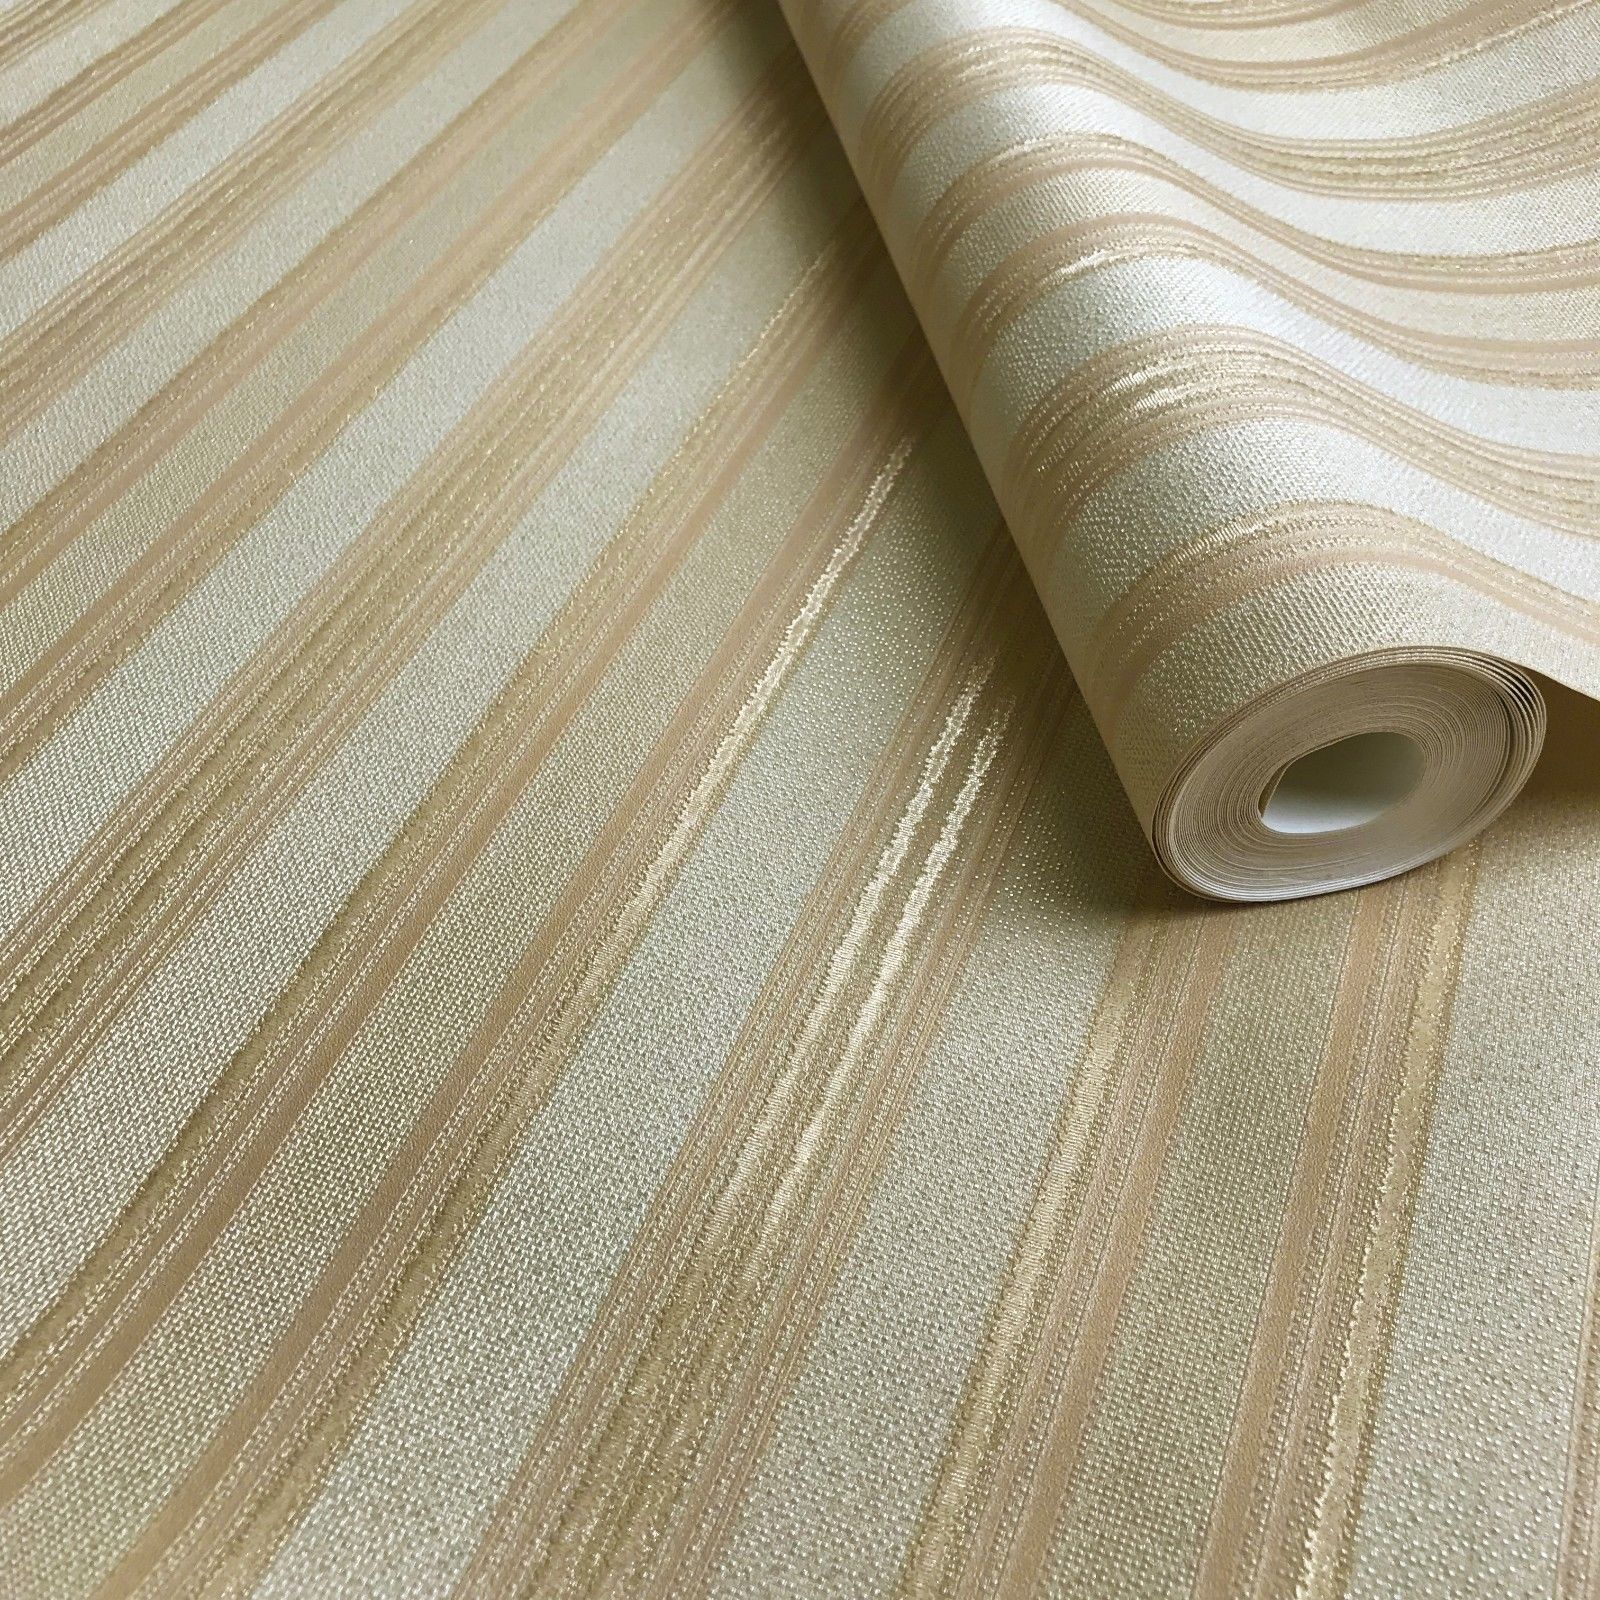 Brown Stripes bordered in Gold on a Cream Natural Background